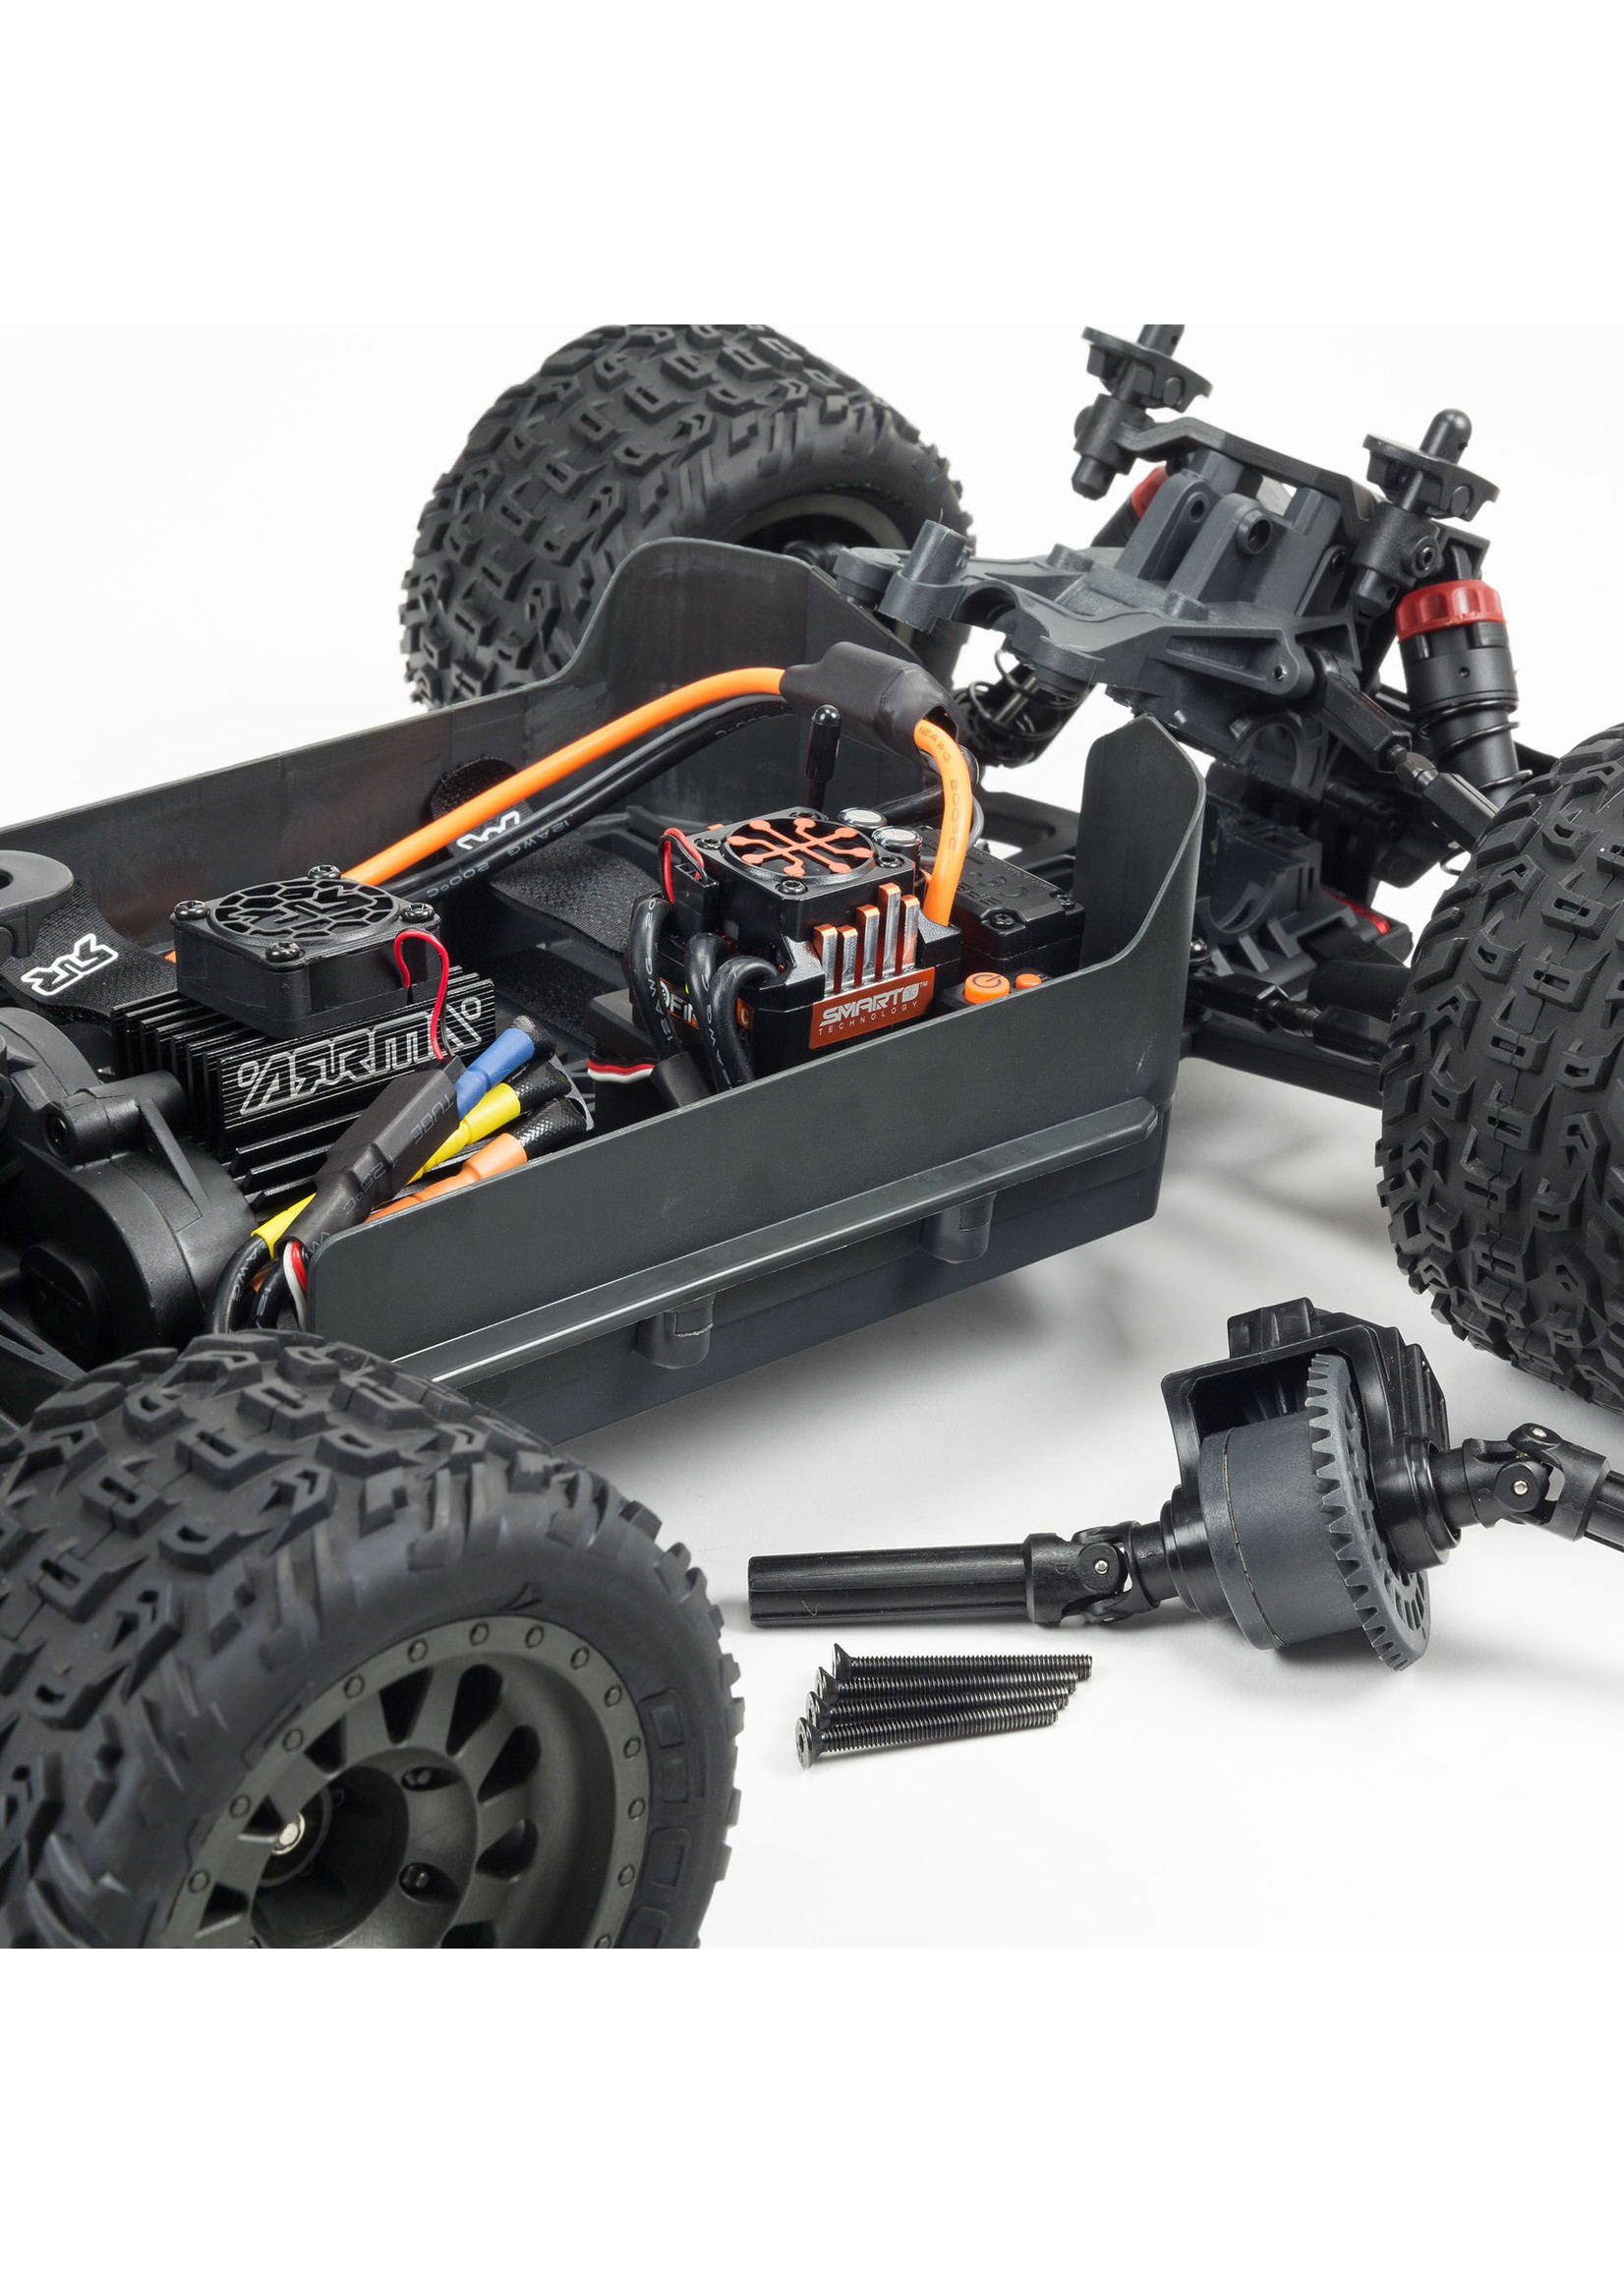  ARRMA RC Truck 1/10 VORTEKS 4X4 3S BLX Stadium Truck RTR  (Batteries and Charger Not Included), Red, ARA4305V3T1 : Toys & Games